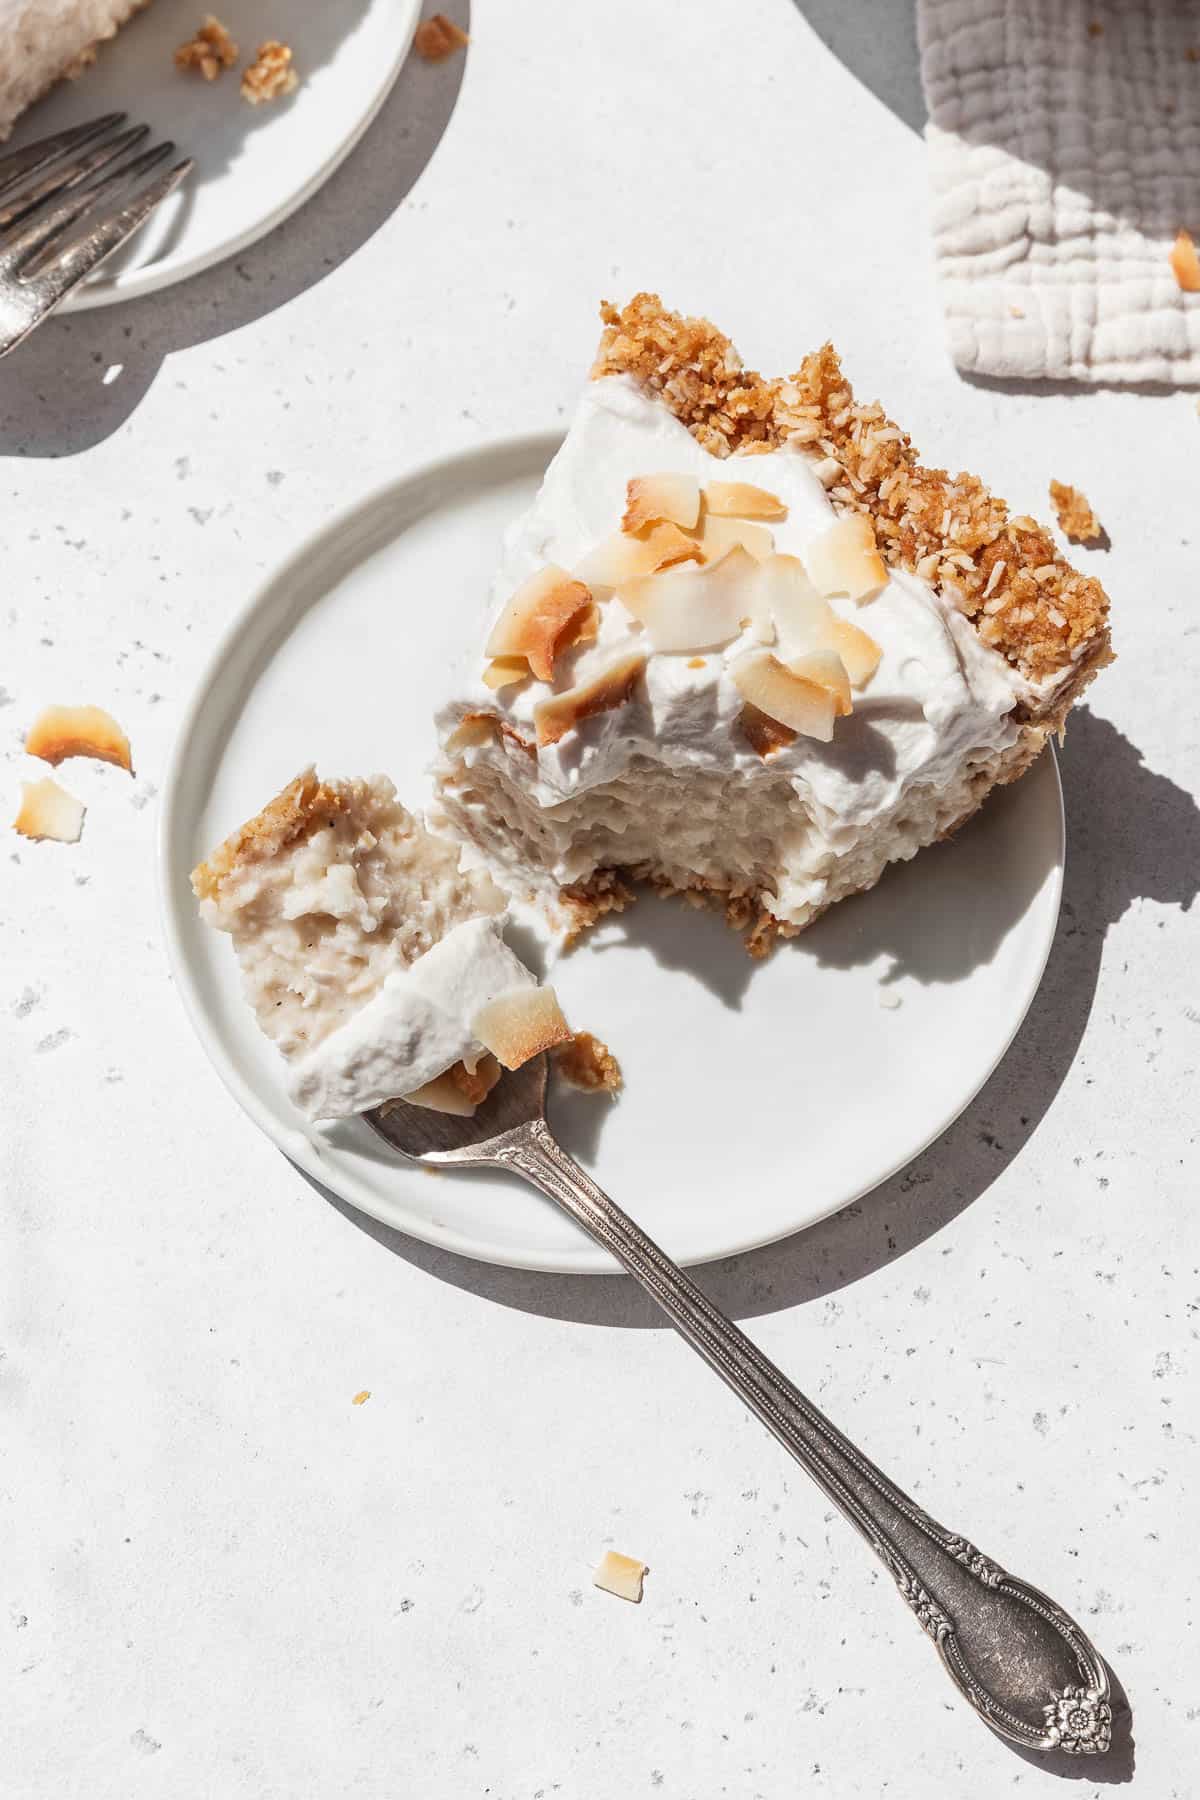 Small white dessert plate with a slice of GF no-bake plant-based coconut cream pie with a silver fork taking a bite out of it.